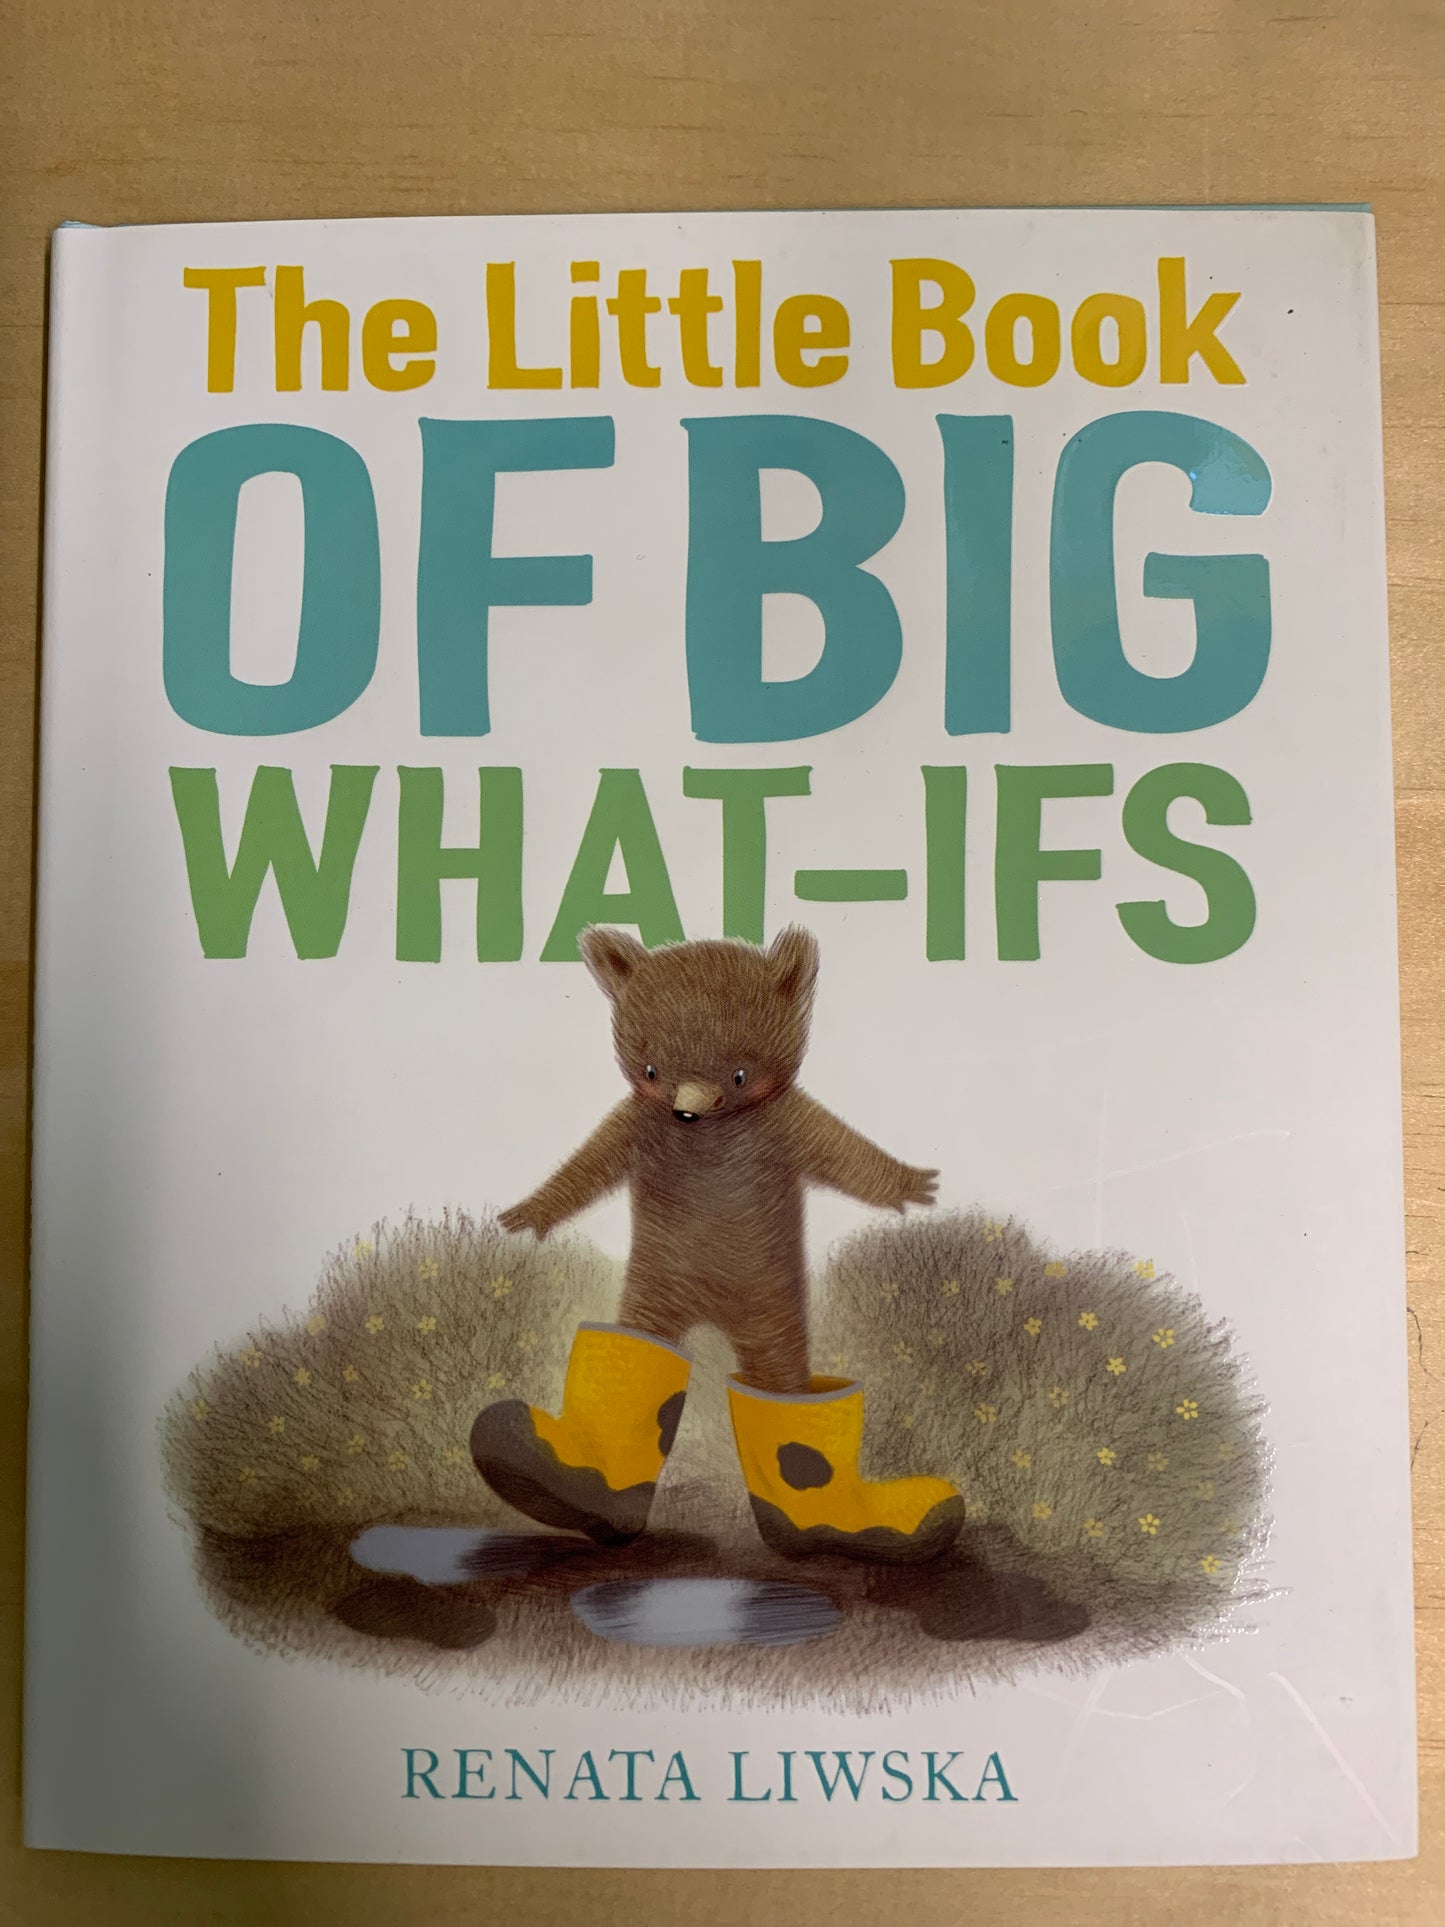 The Little Book of Big What-Ifs